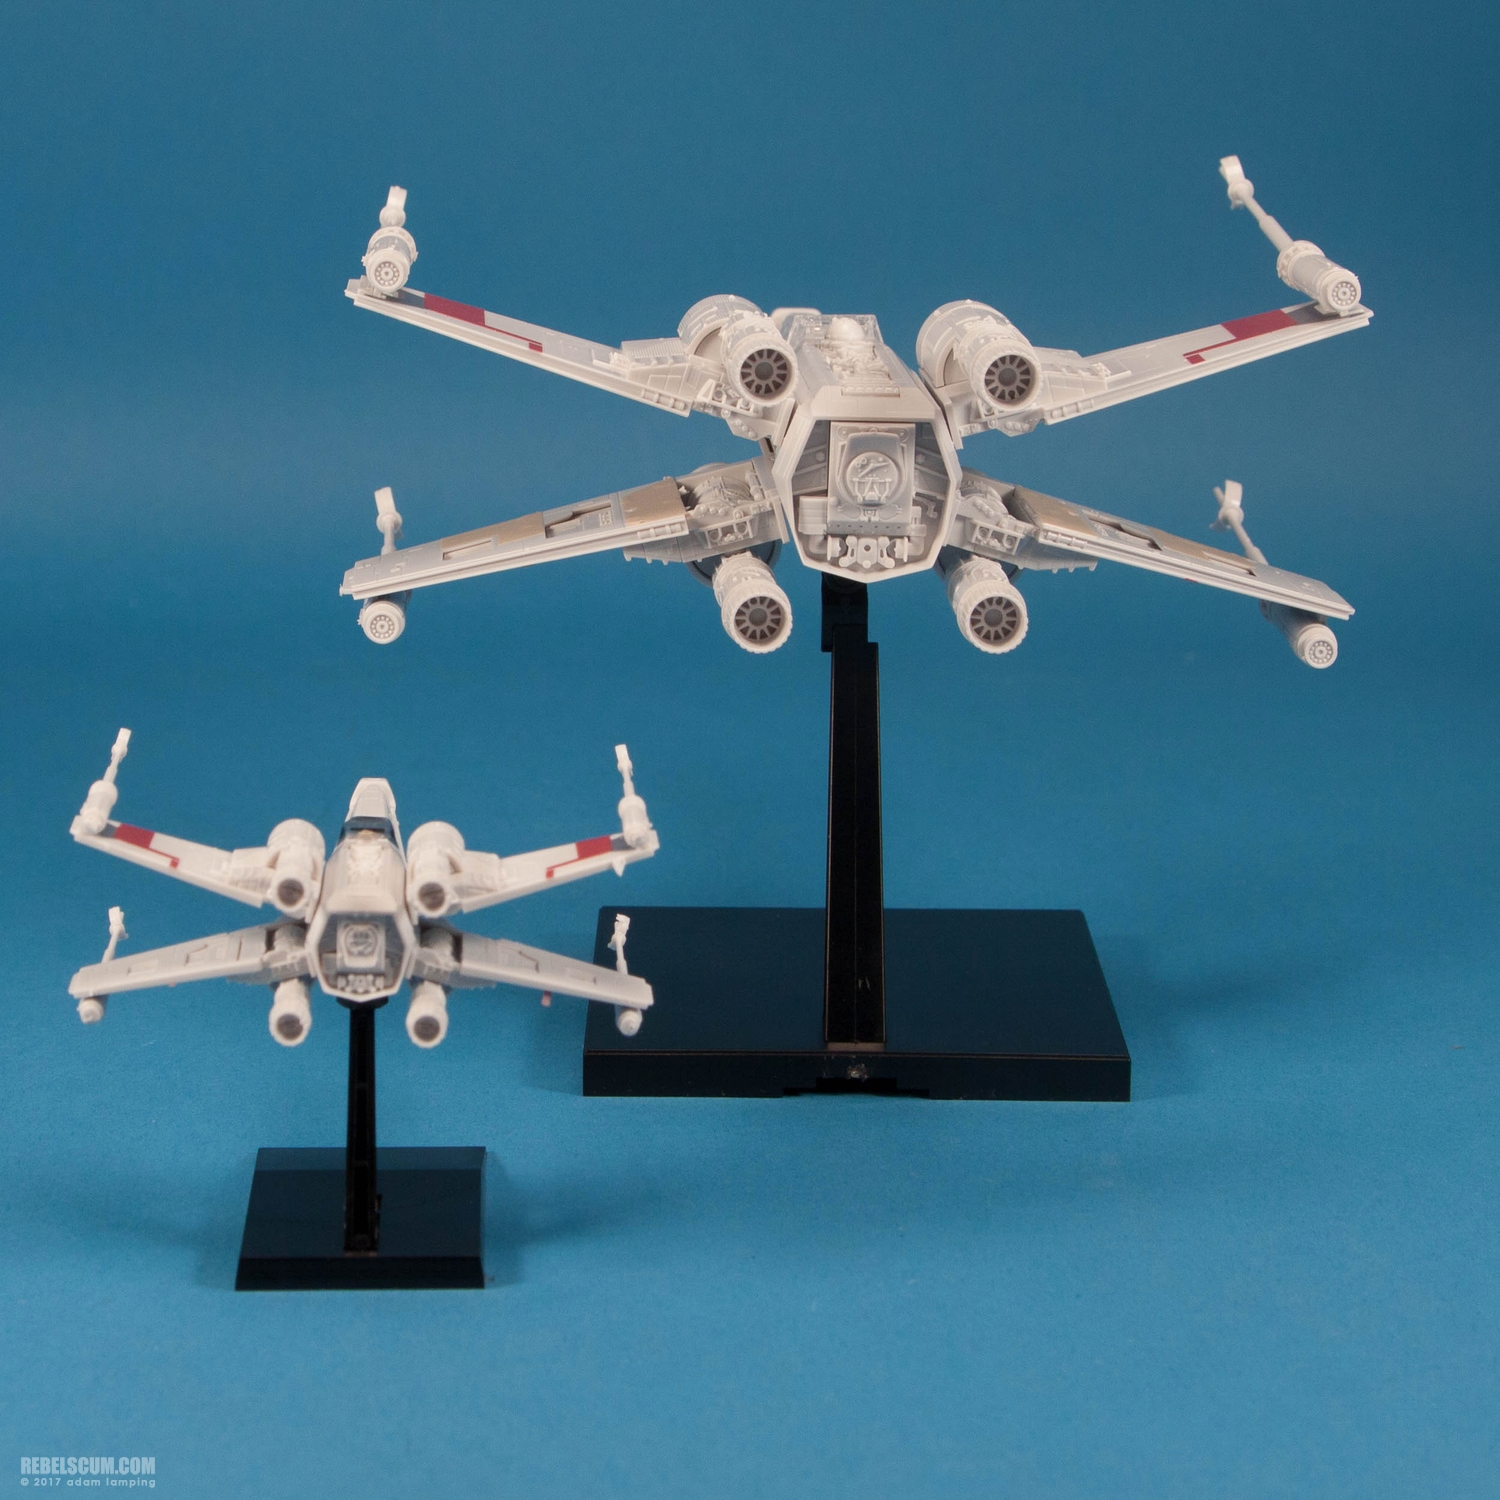 bandai-red-squadron-x-wing-starfighter-scale-model-kit-028.jpg